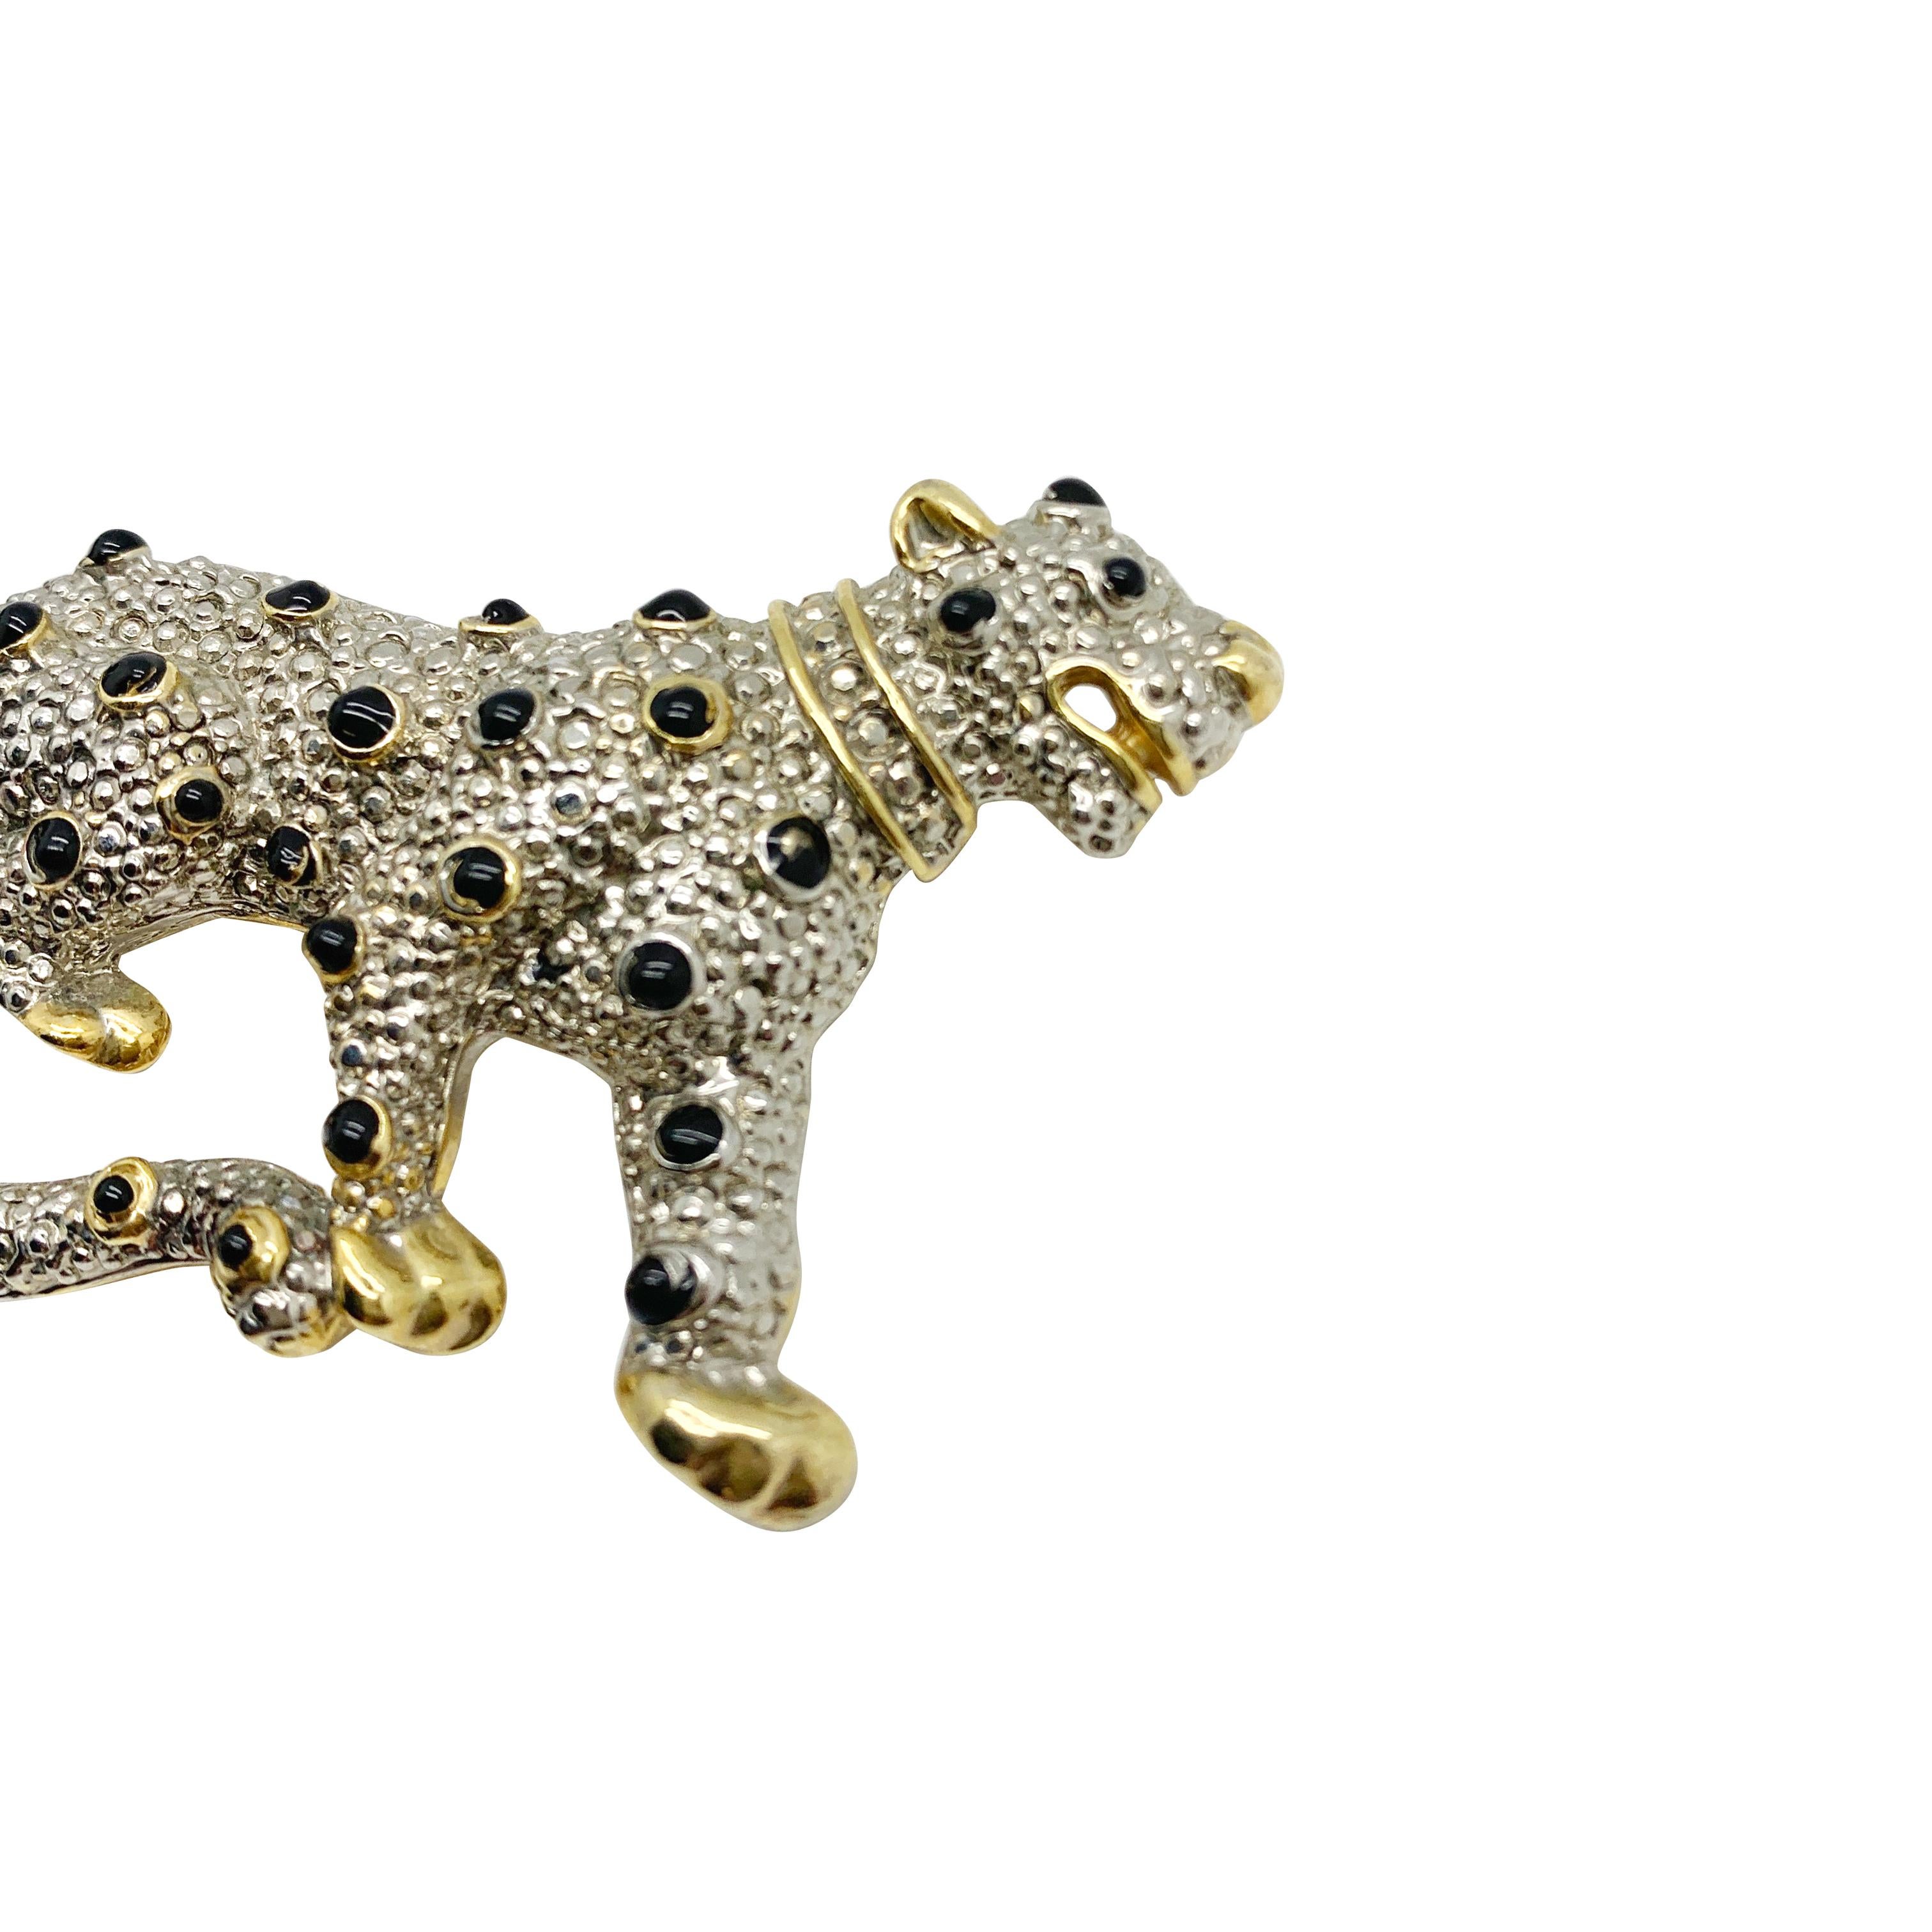 A Vintage Leopard Brooch. Featuring a full body leopard with enamelled black spots and crystal collar. Vintage Condition: Very good without damage or noteworthy wear. 
Materials: Gold plated metal, silver-tone metal, enamel, glass crystals
Signed: